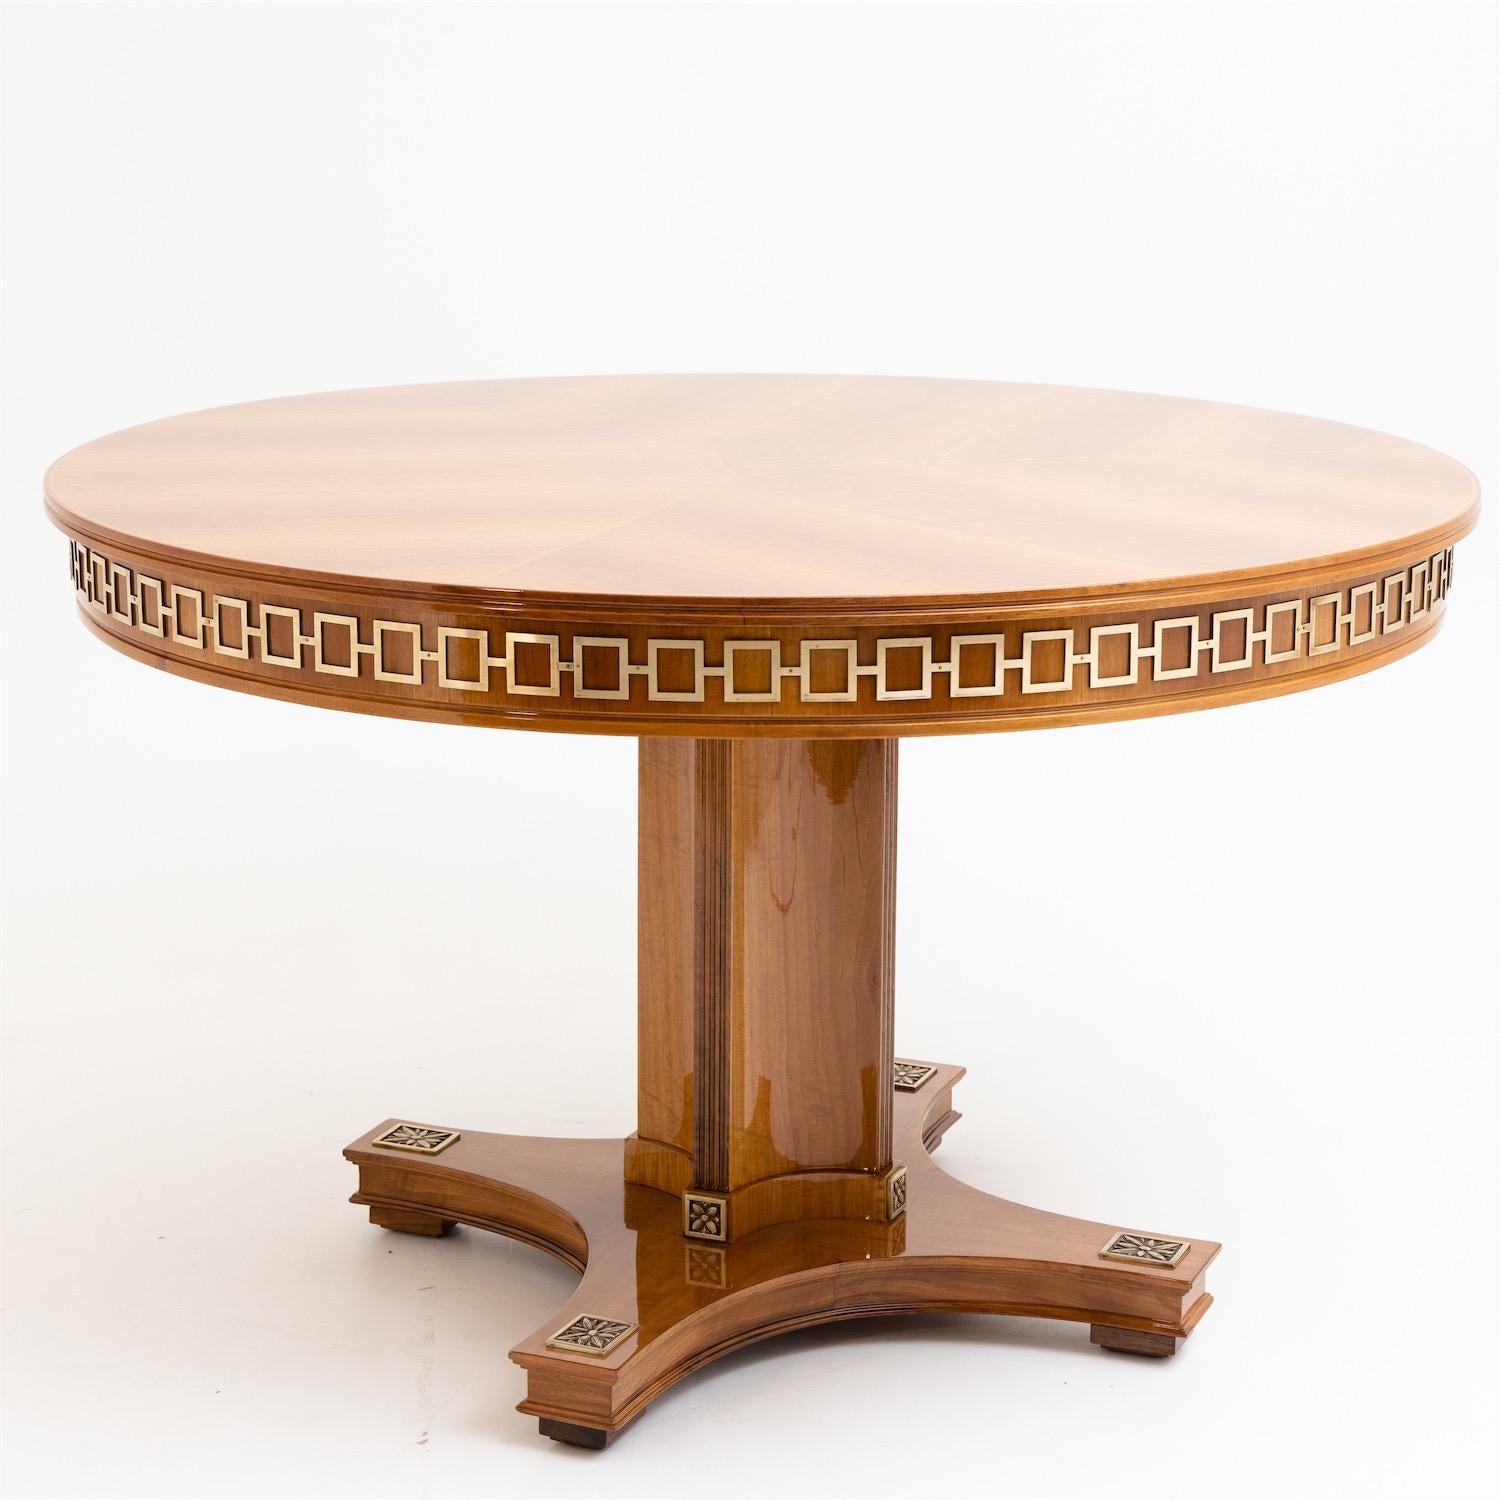 Salon table standing on a quatrefoil stand with a round tabletop and a geometric brass band on the frame. The foot is decorated with plaques with flower motifs; the tabletop is inlaid with fine stylized acanthus leaf motifs. The table has been